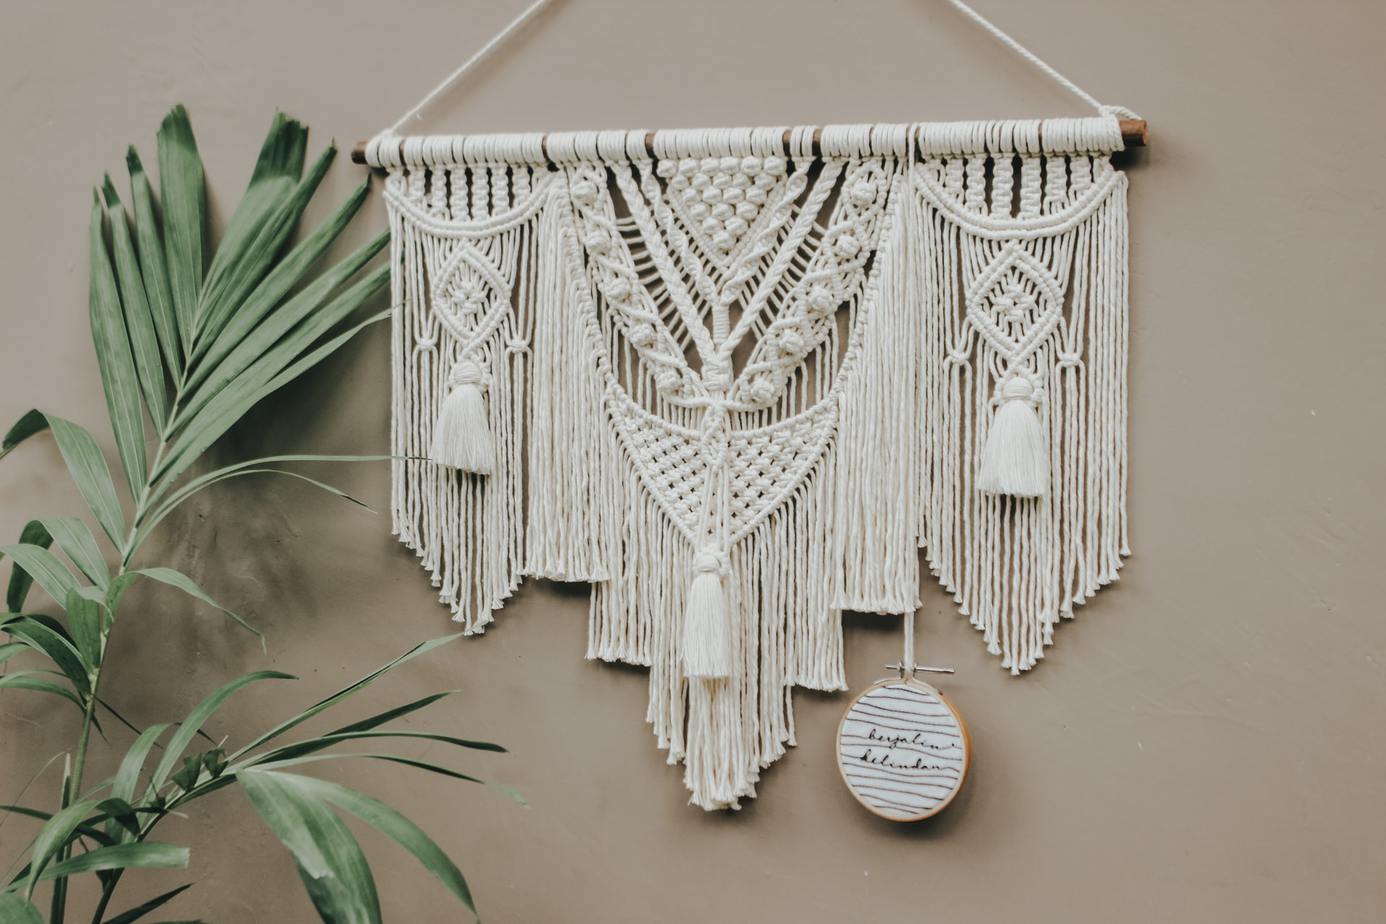 Scandi boho – the style that is winning hearts on Instagram